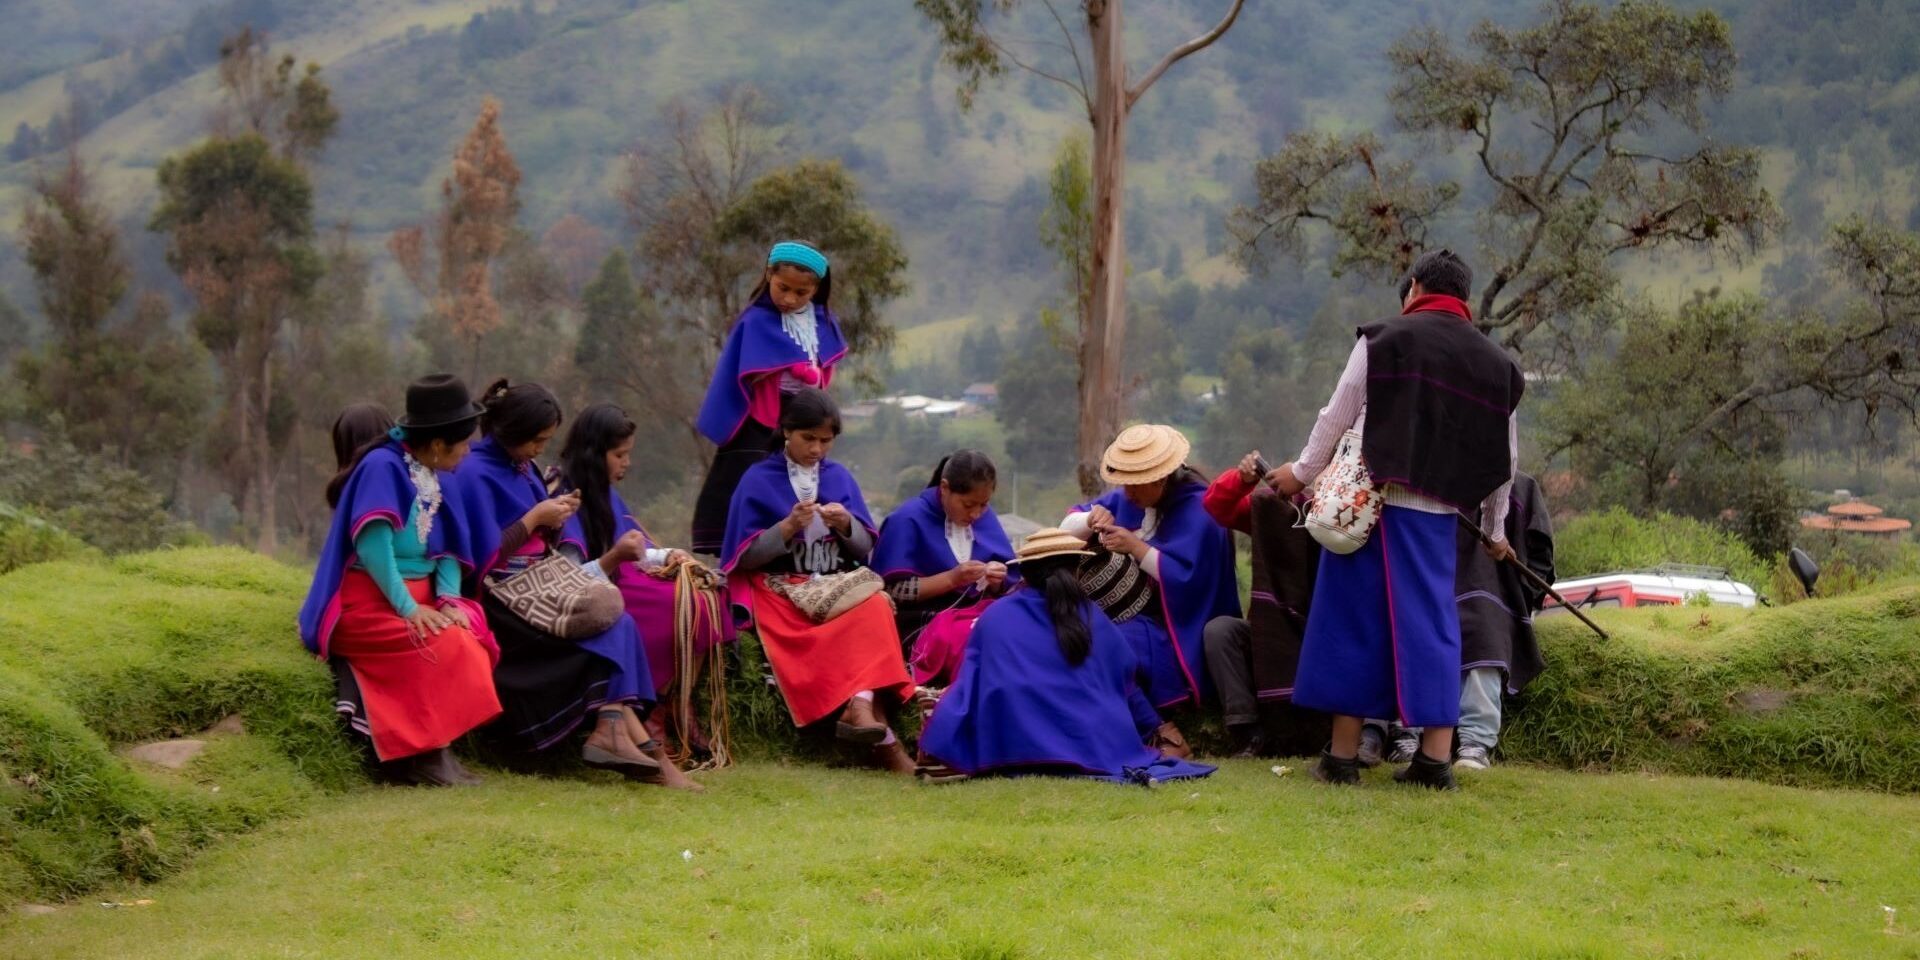 Group of women work on crafts in a field in Colombia